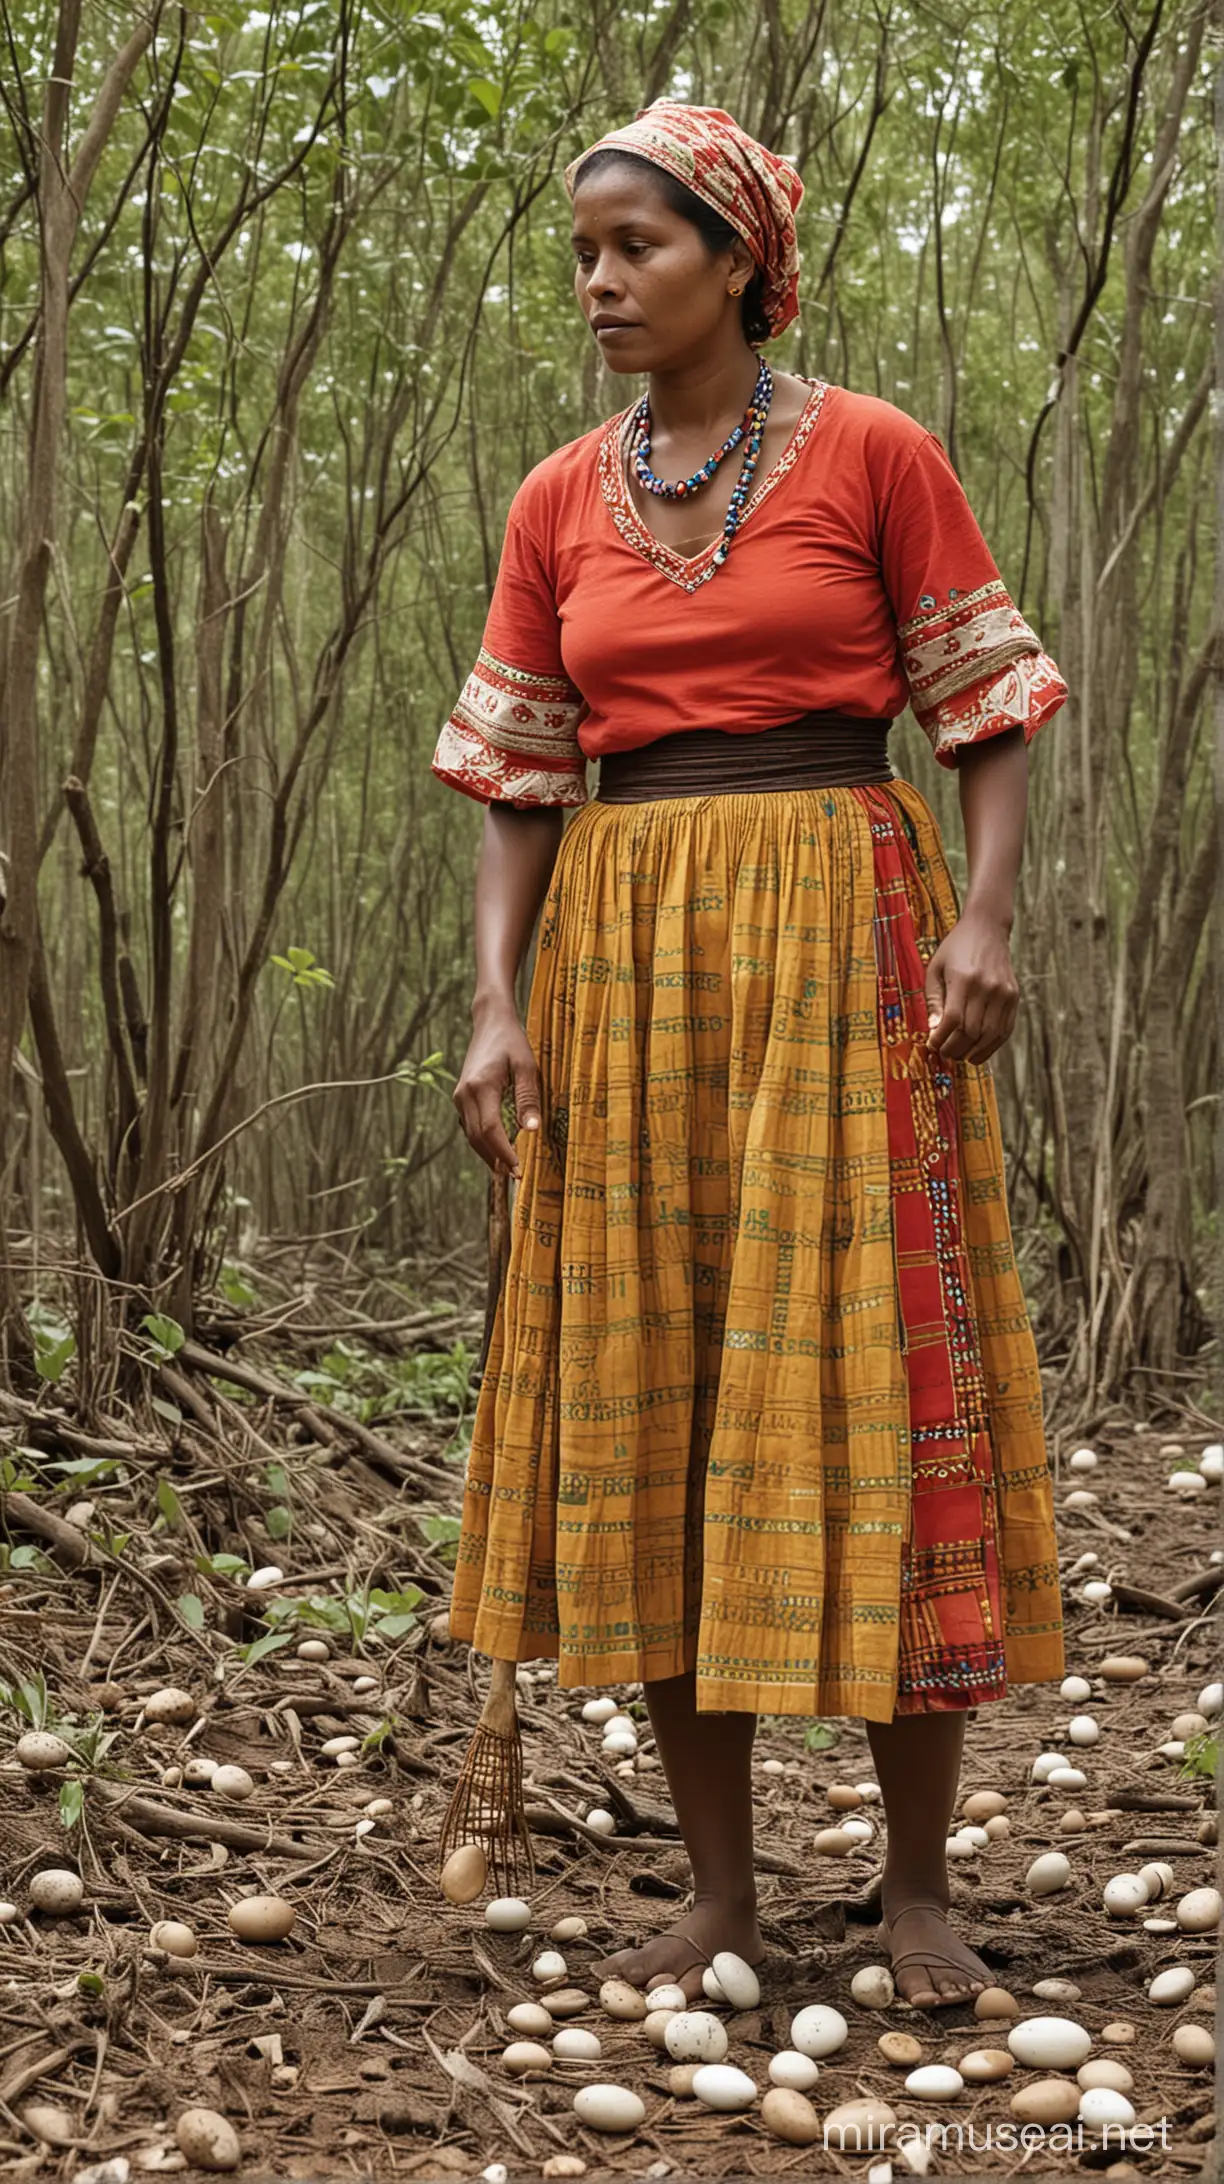 A Mashco Piro woman, dressed in traditional attire, searches for turtle nests deep in the forest and collects eggs, which are a vital source of sustenance.
